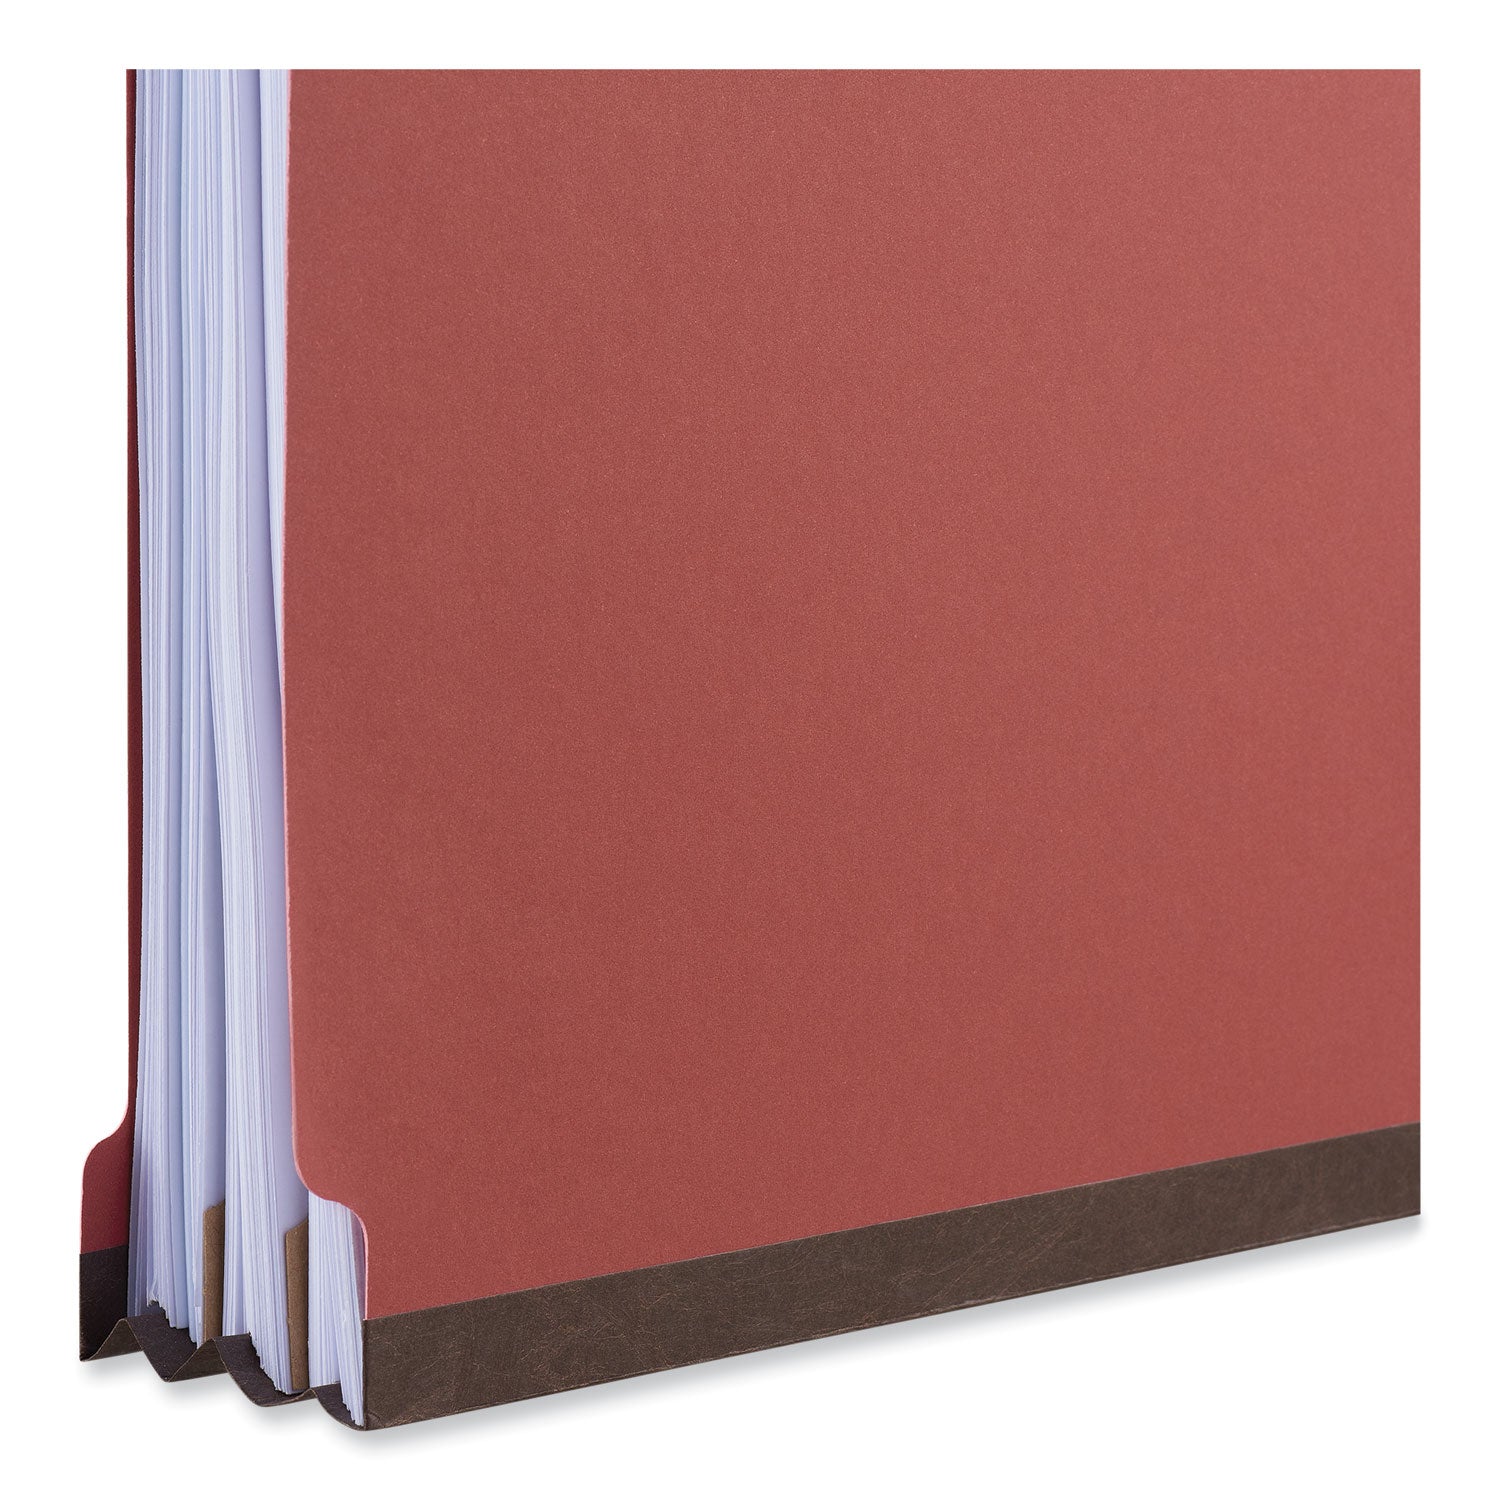 six-section-classification-folders-heavy-duty-pressboard-cover-2-dividers-6-fasteners-letter-size-brick-red-20-box_unv10408 - 4